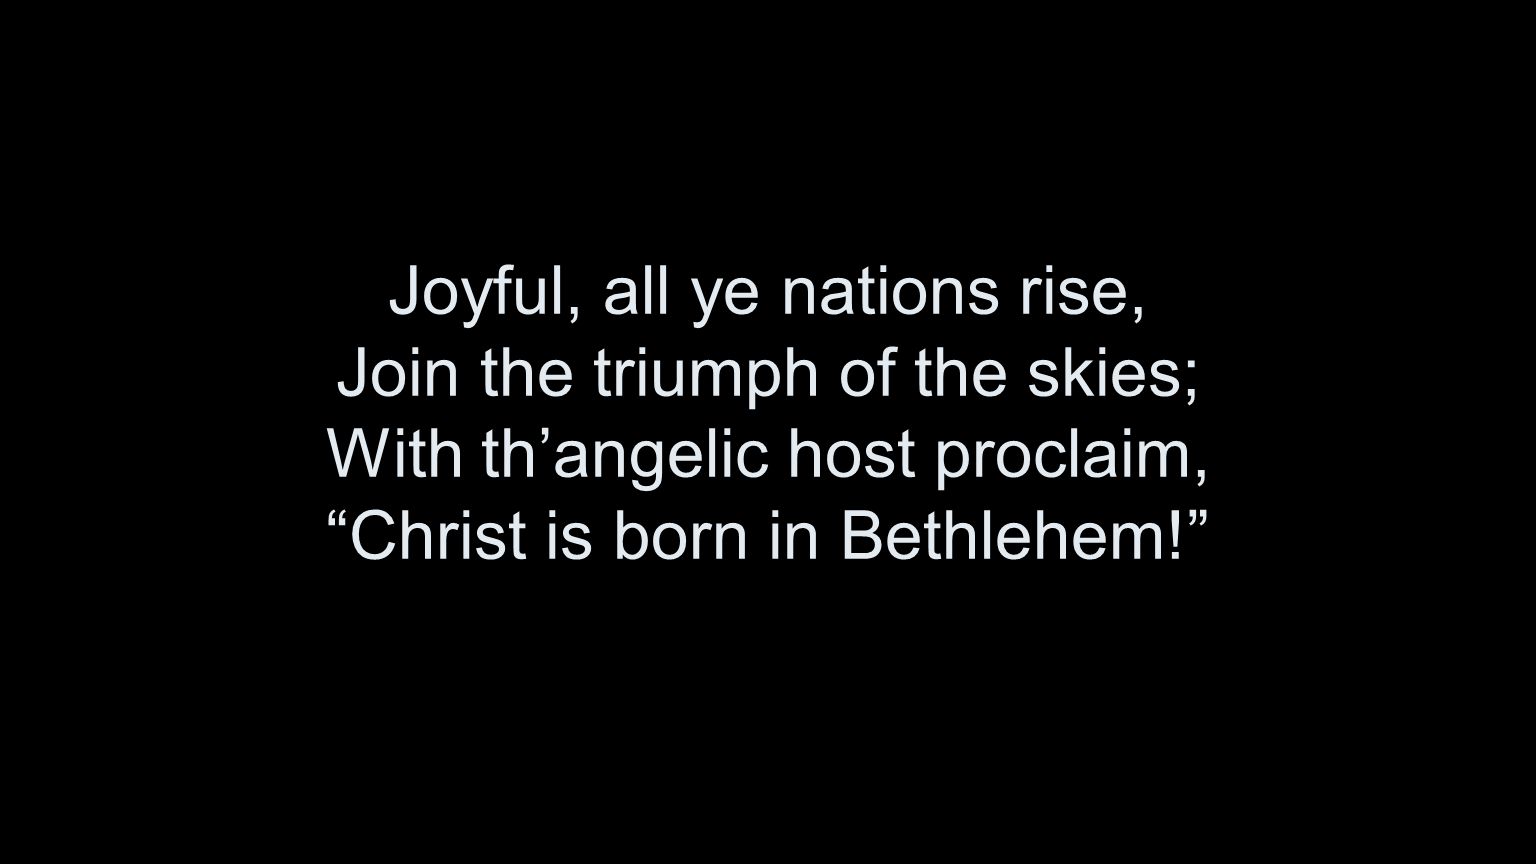 Joyful, all ye nations rise, Join the triumph of the skies; With th’angelic host proclaim, Christ is born in Bethlehem!